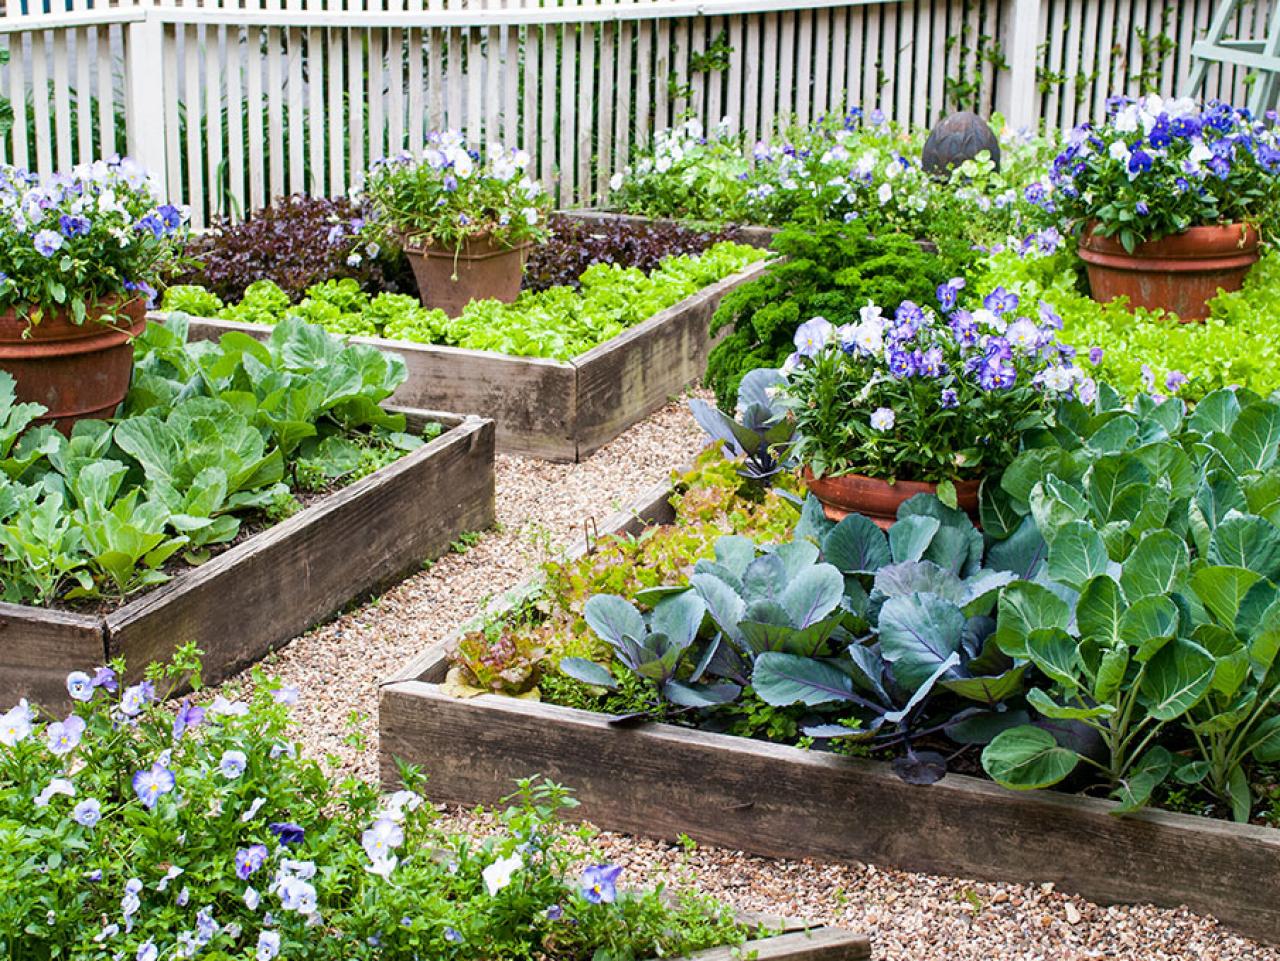 Should I Plant My Vegetable Garden in Raised Beds? | HGTV